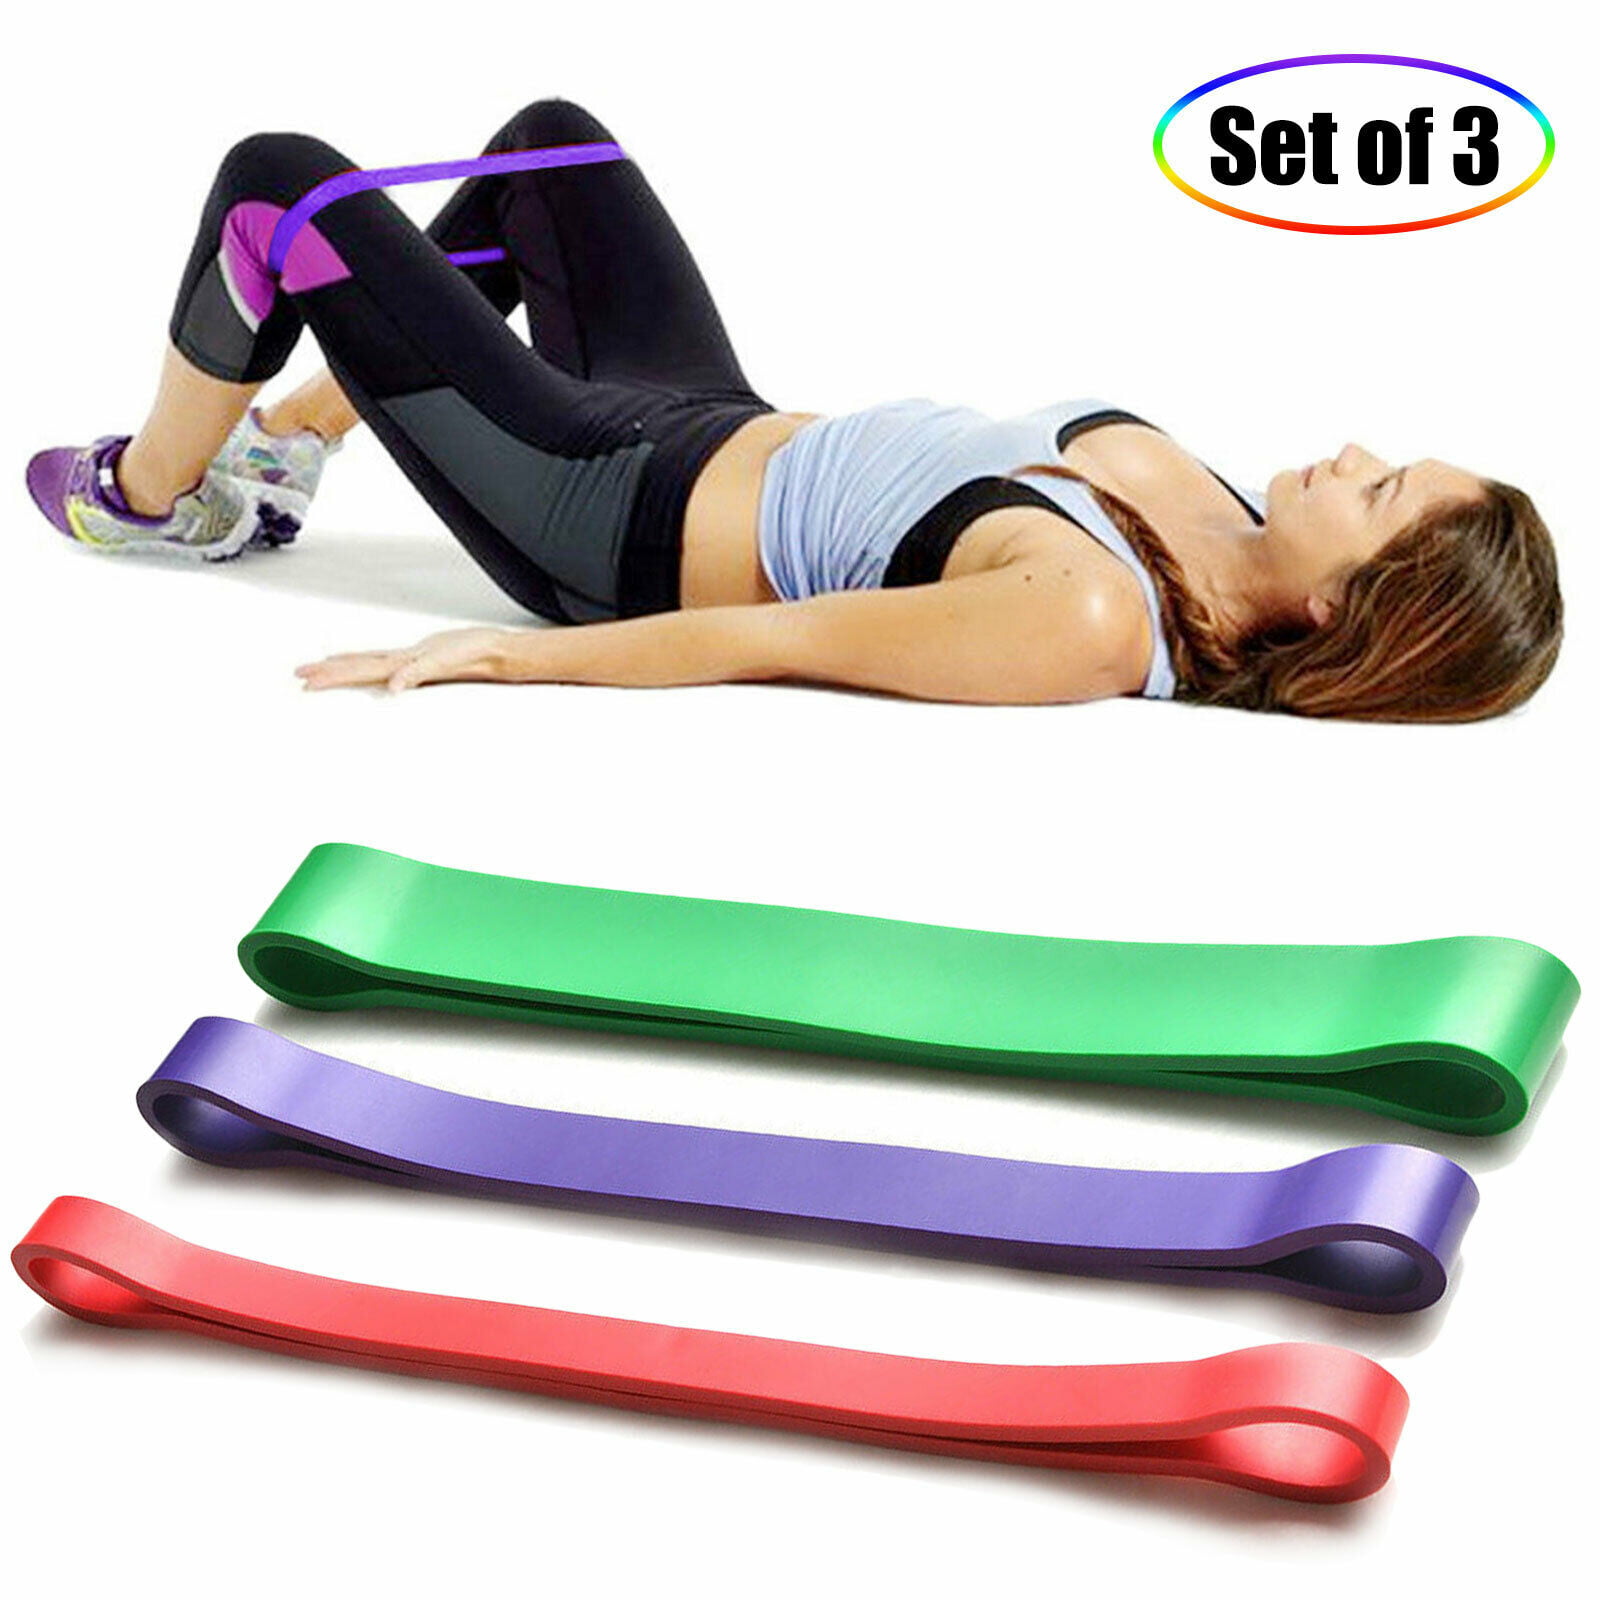 Workout Resistance Bands Loop Set CrossFit Fitness Yoga Booty Leg Exercise Band